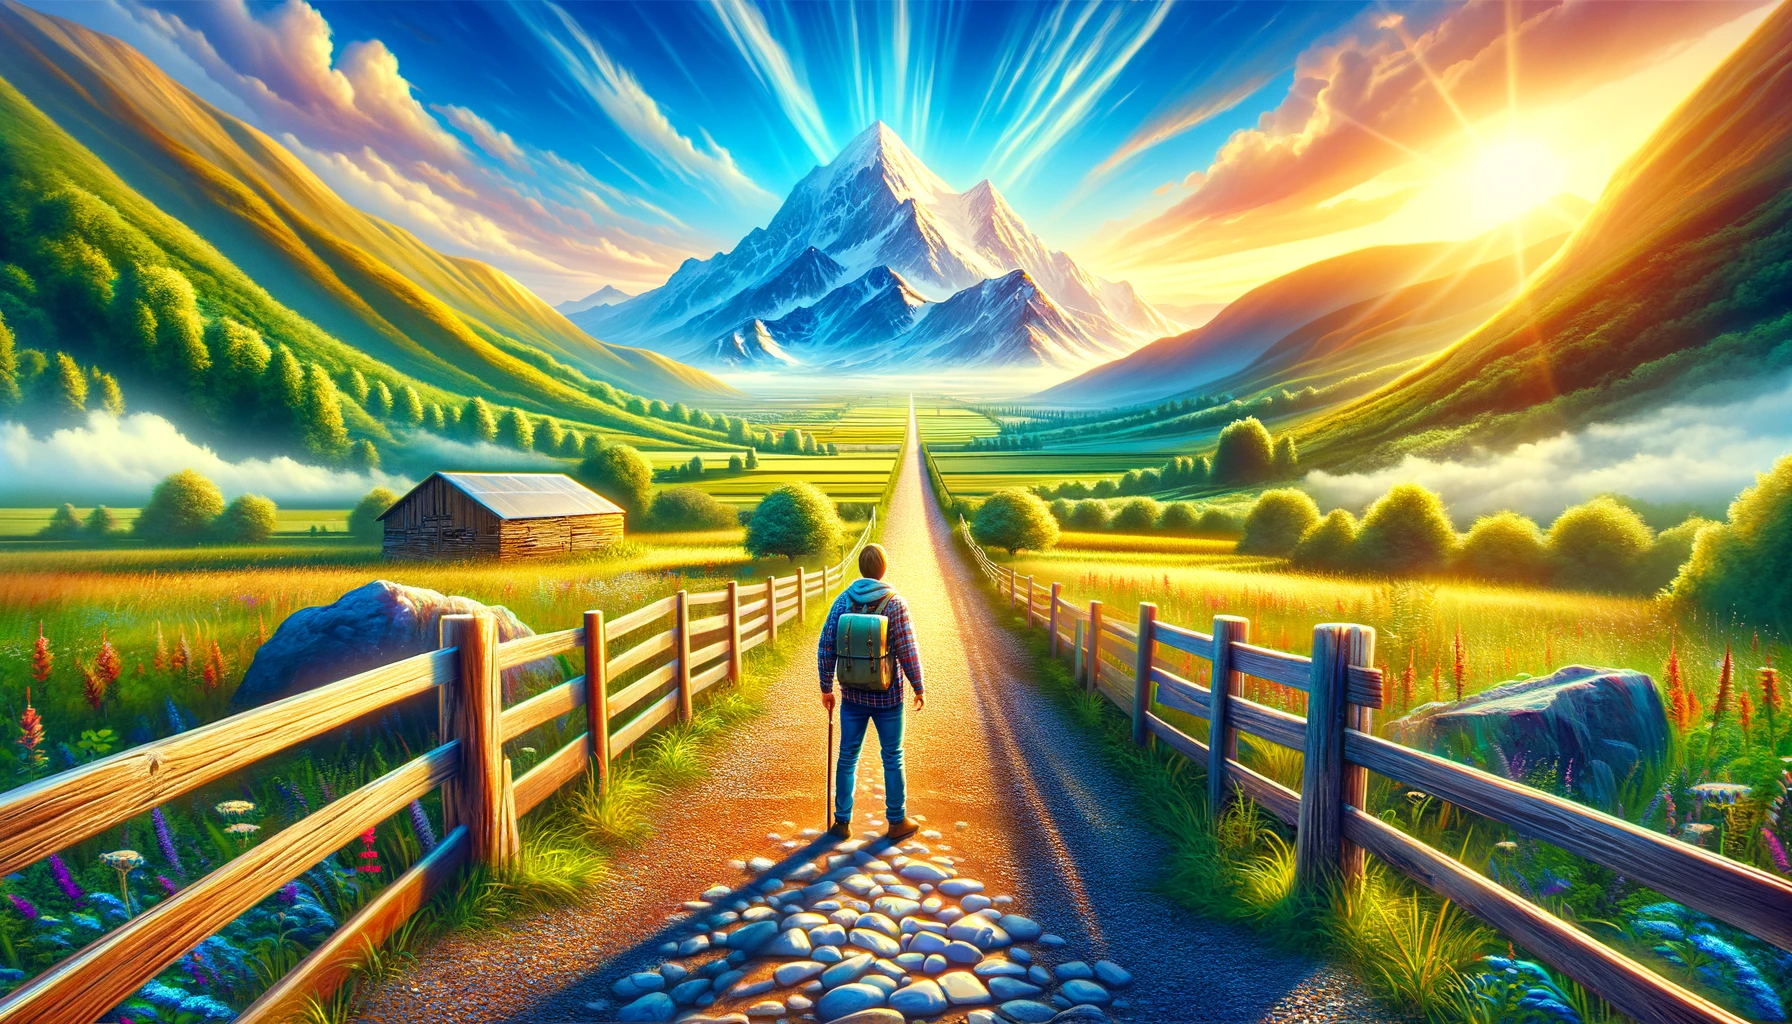 An uplifting scene depicting a traveler at the end of a gravel path, facing a fence with a majestic mountain in the distance, embodying the challenges and beauty of life's journey.